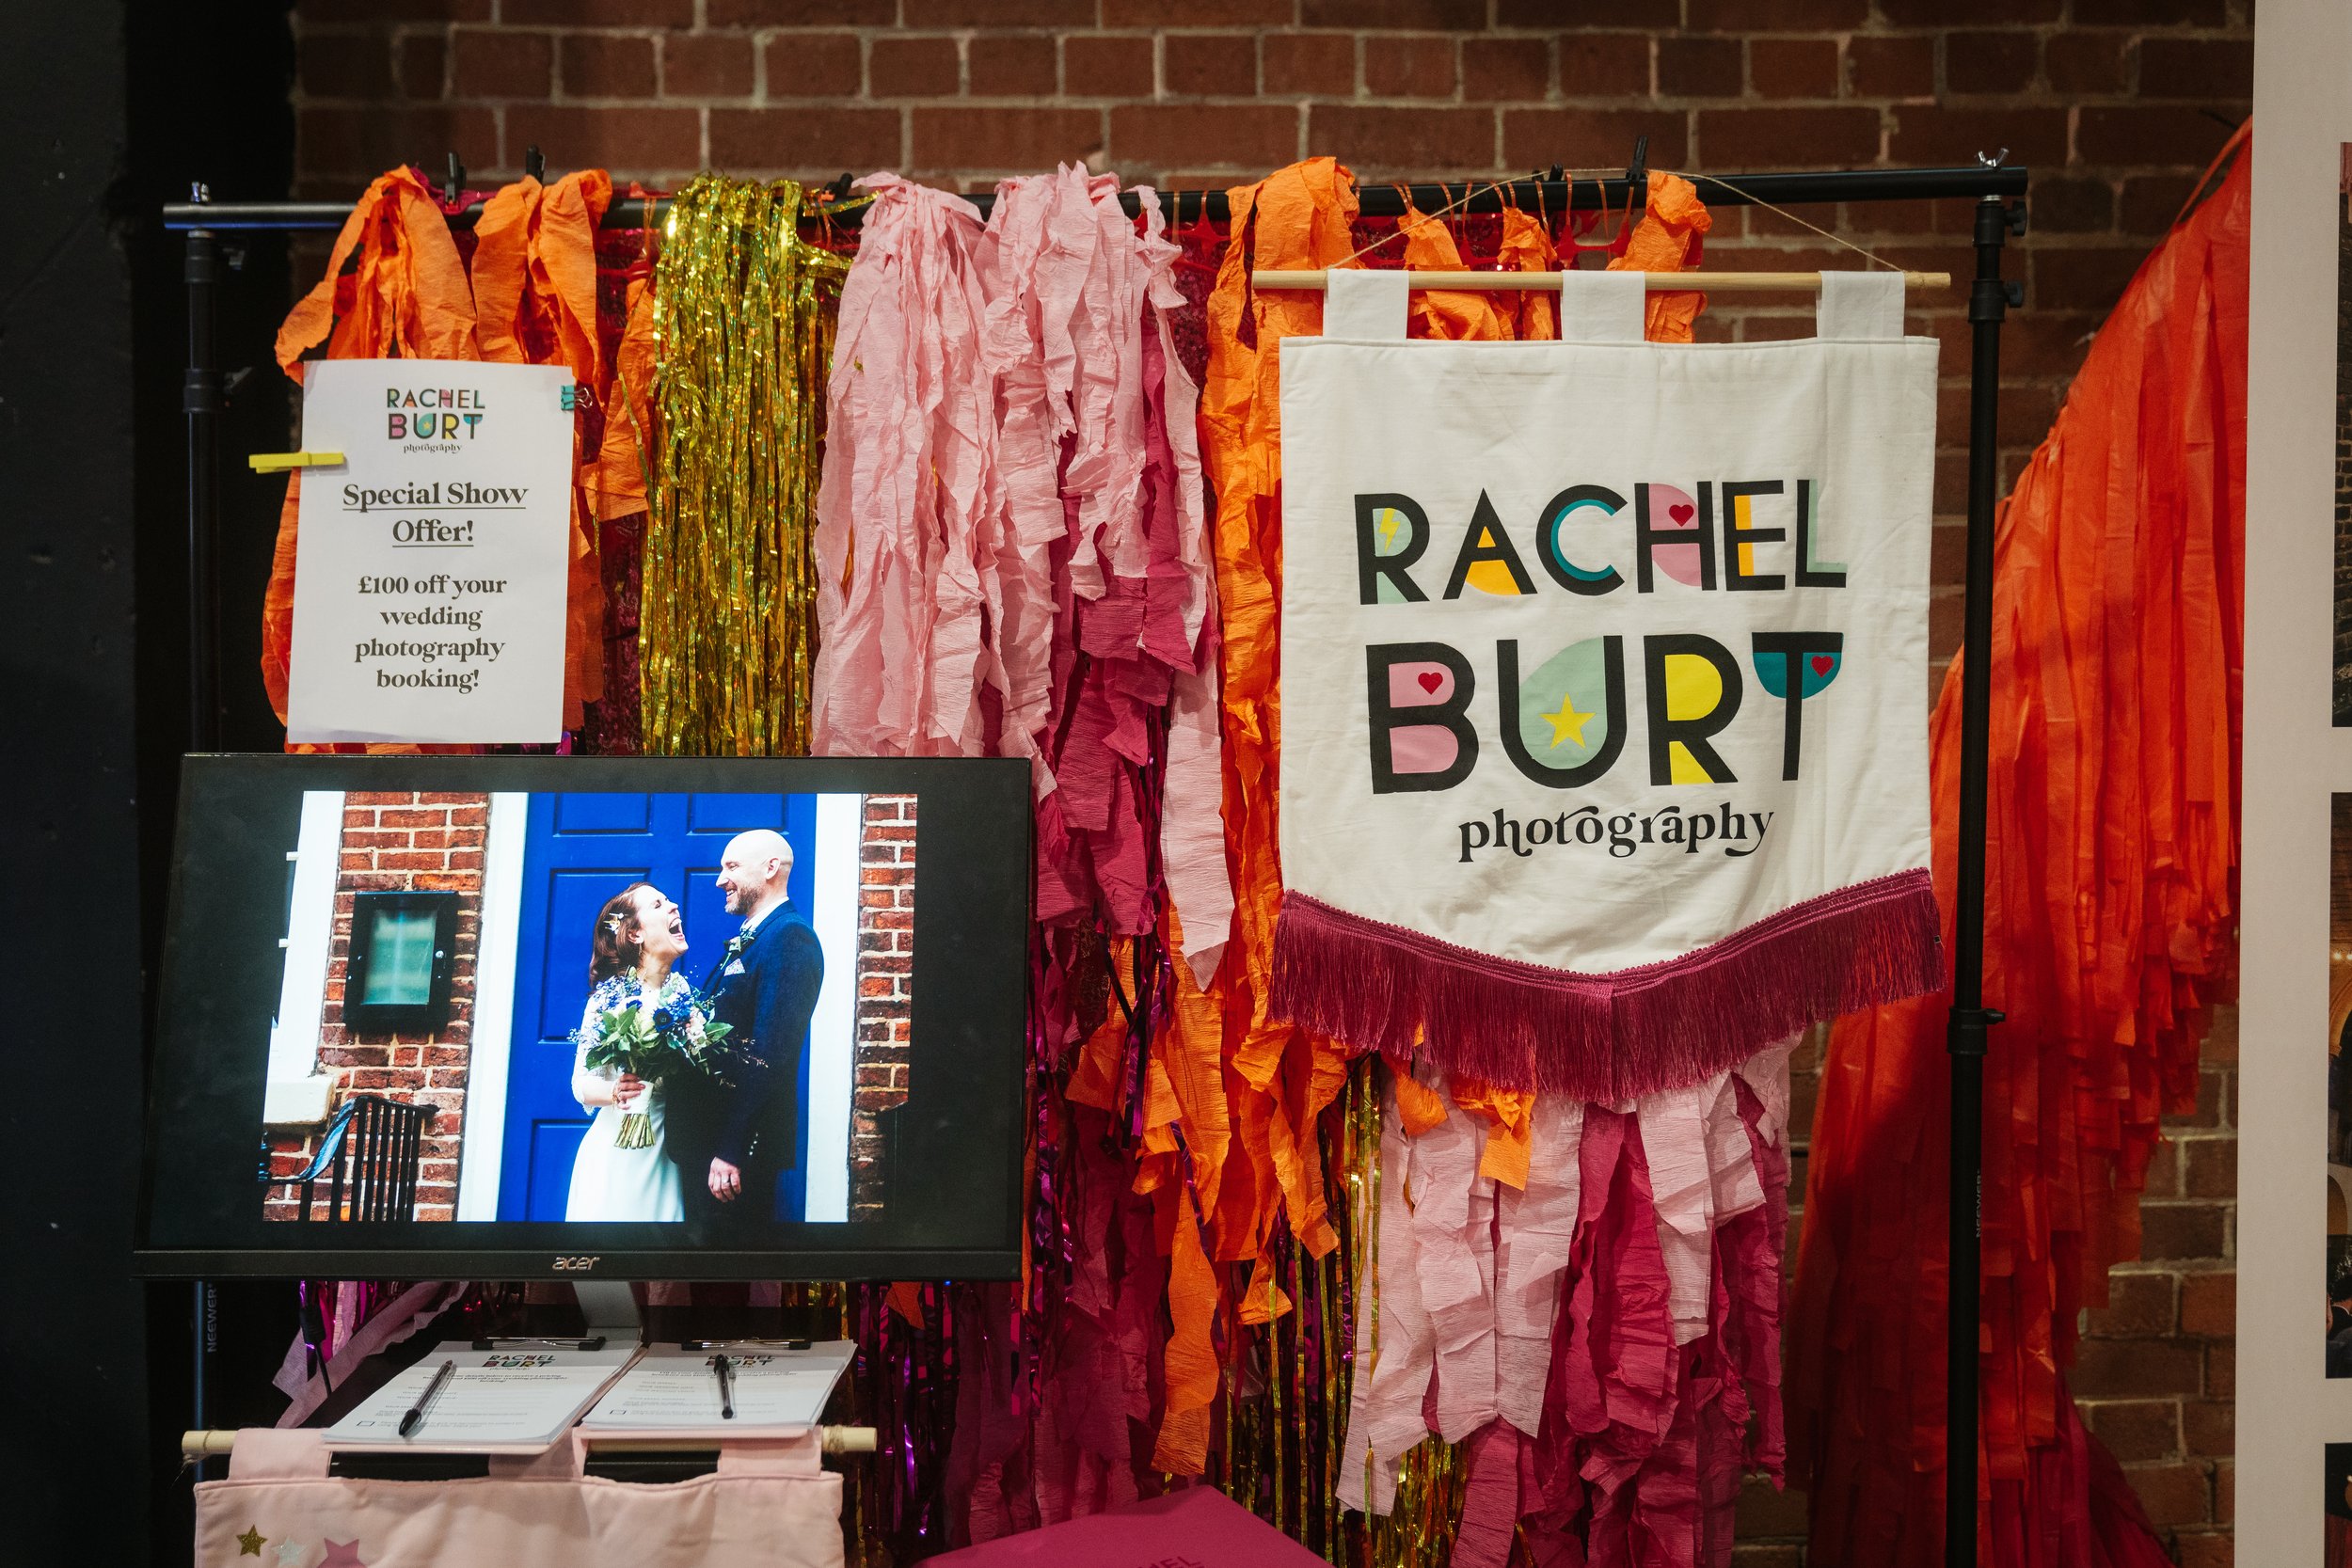  RACHEL BURT PHOTOGRAPHY banner is hung against a backdrop of multicoloured streamers with a monitor in front showcasing some of the incredible wedding photographers work. 